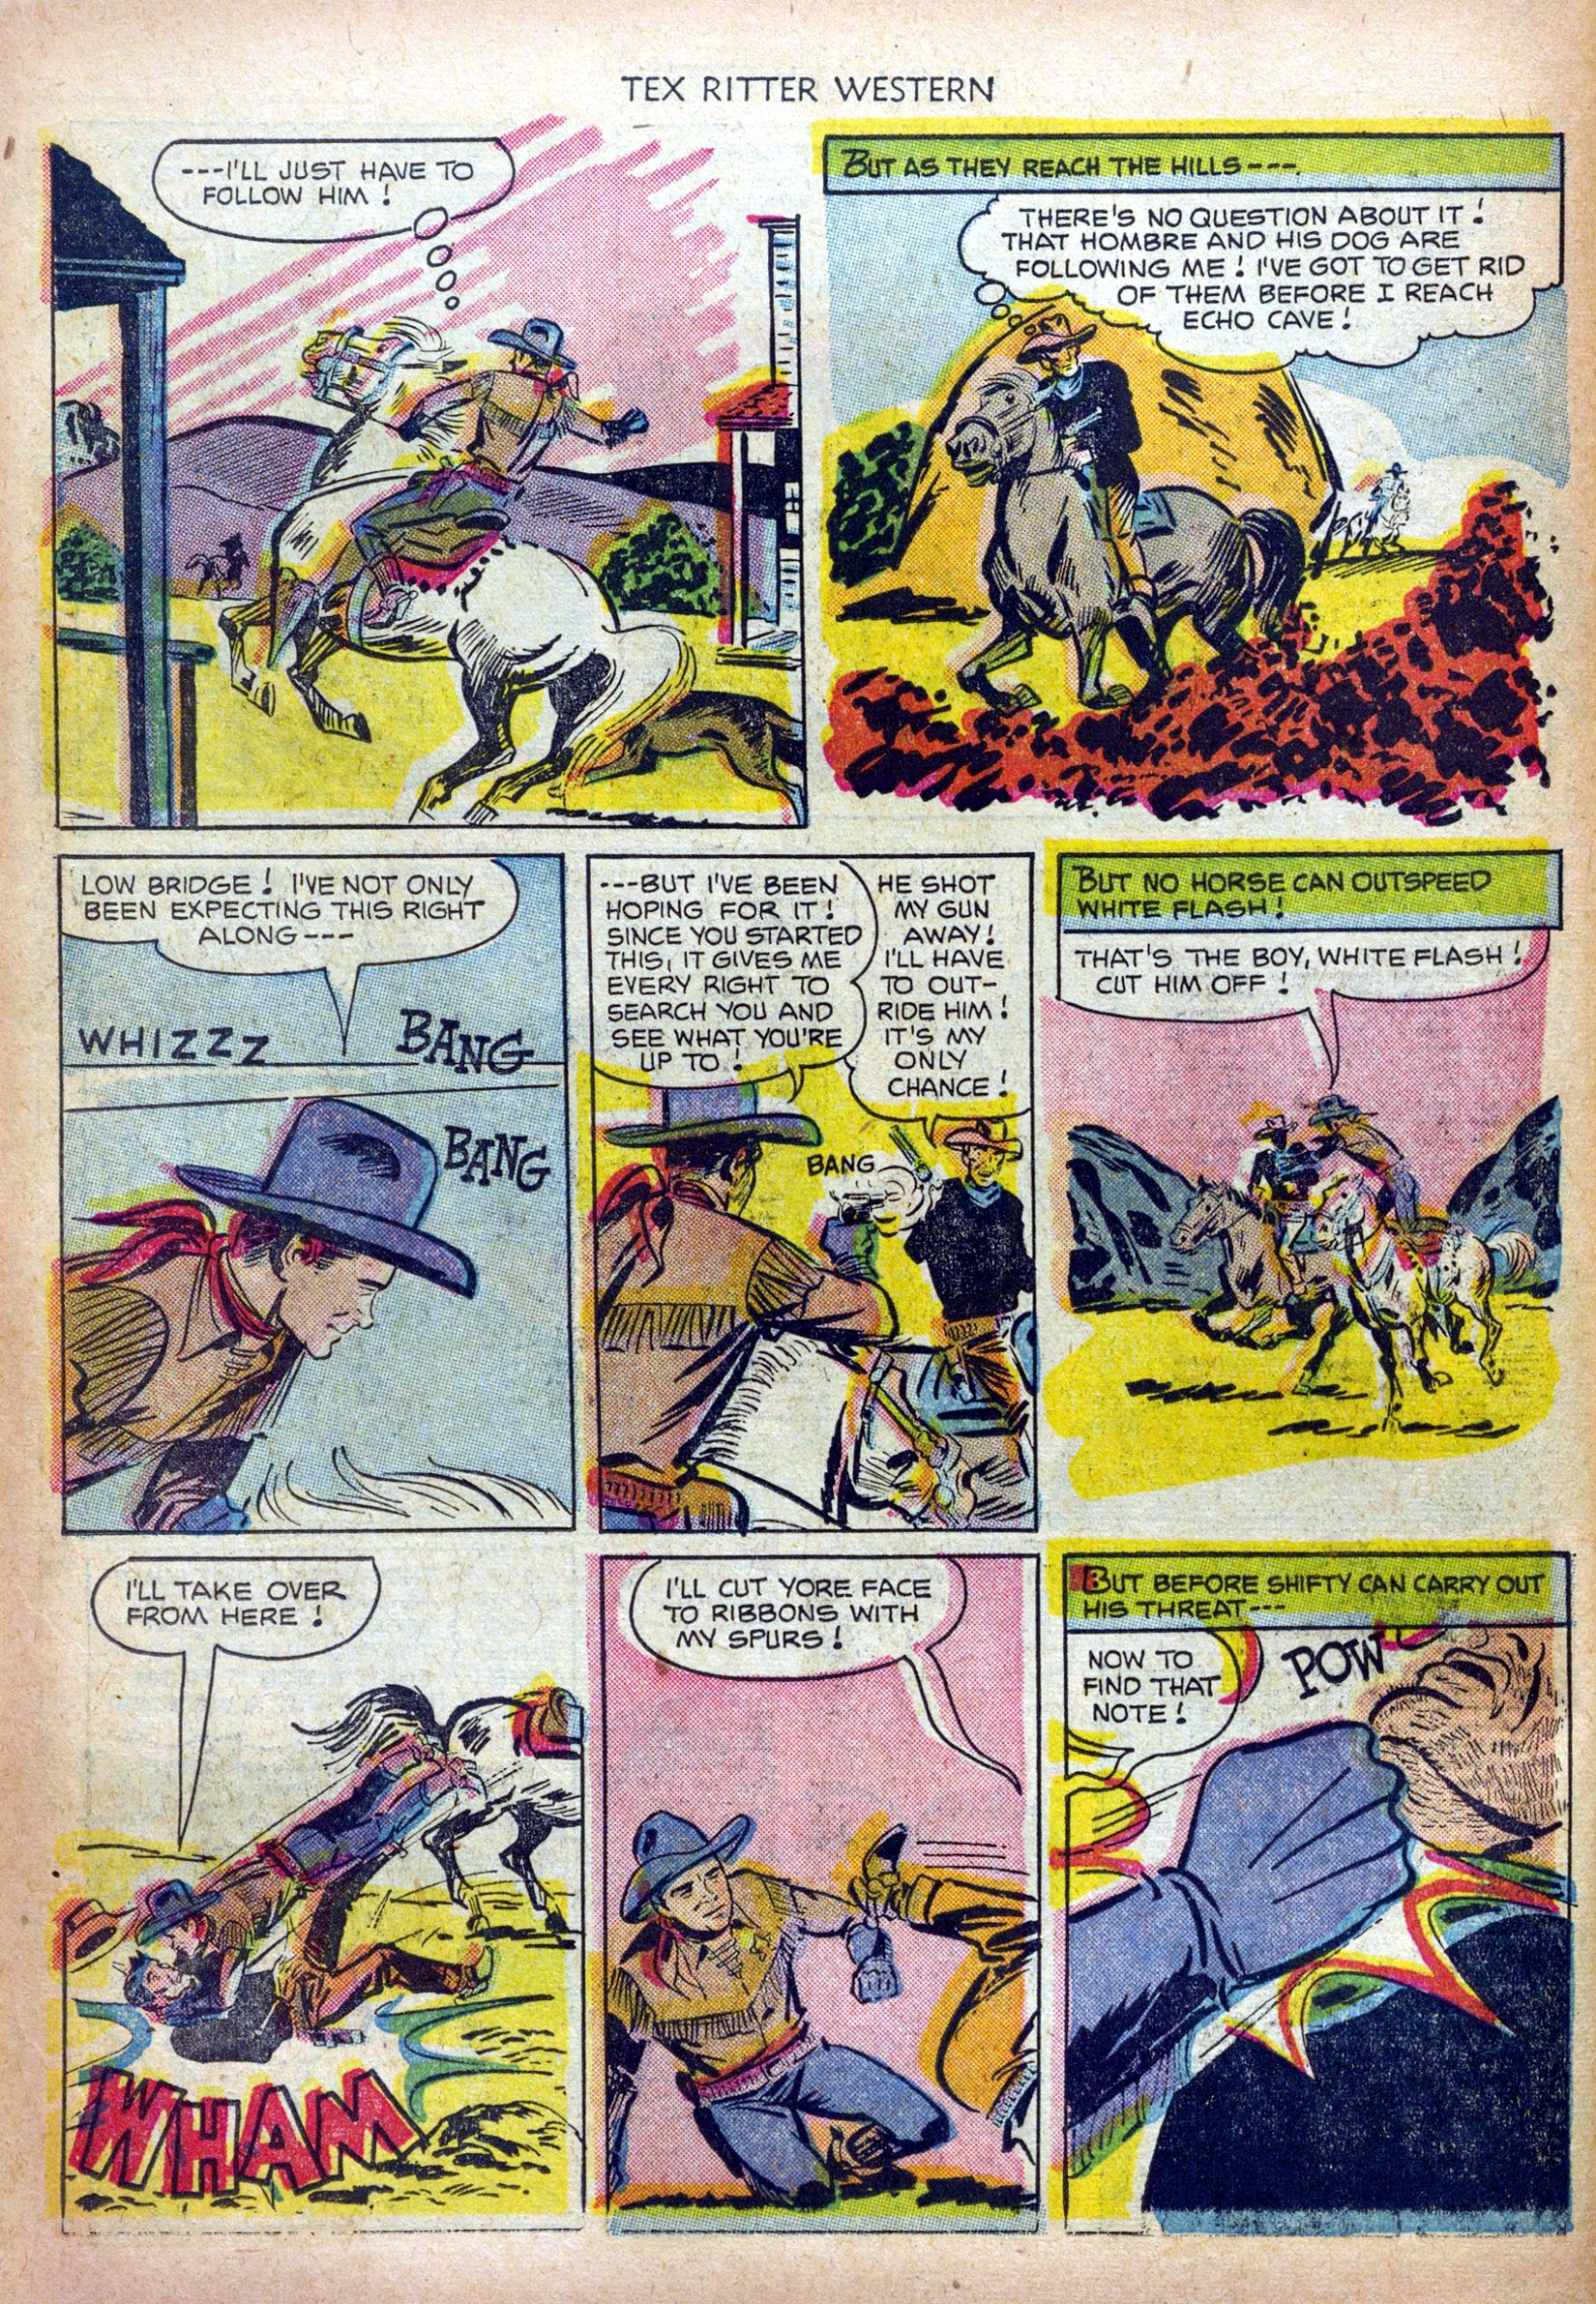 Read online Tex Ritter Western comic -  Issue #12 - 30